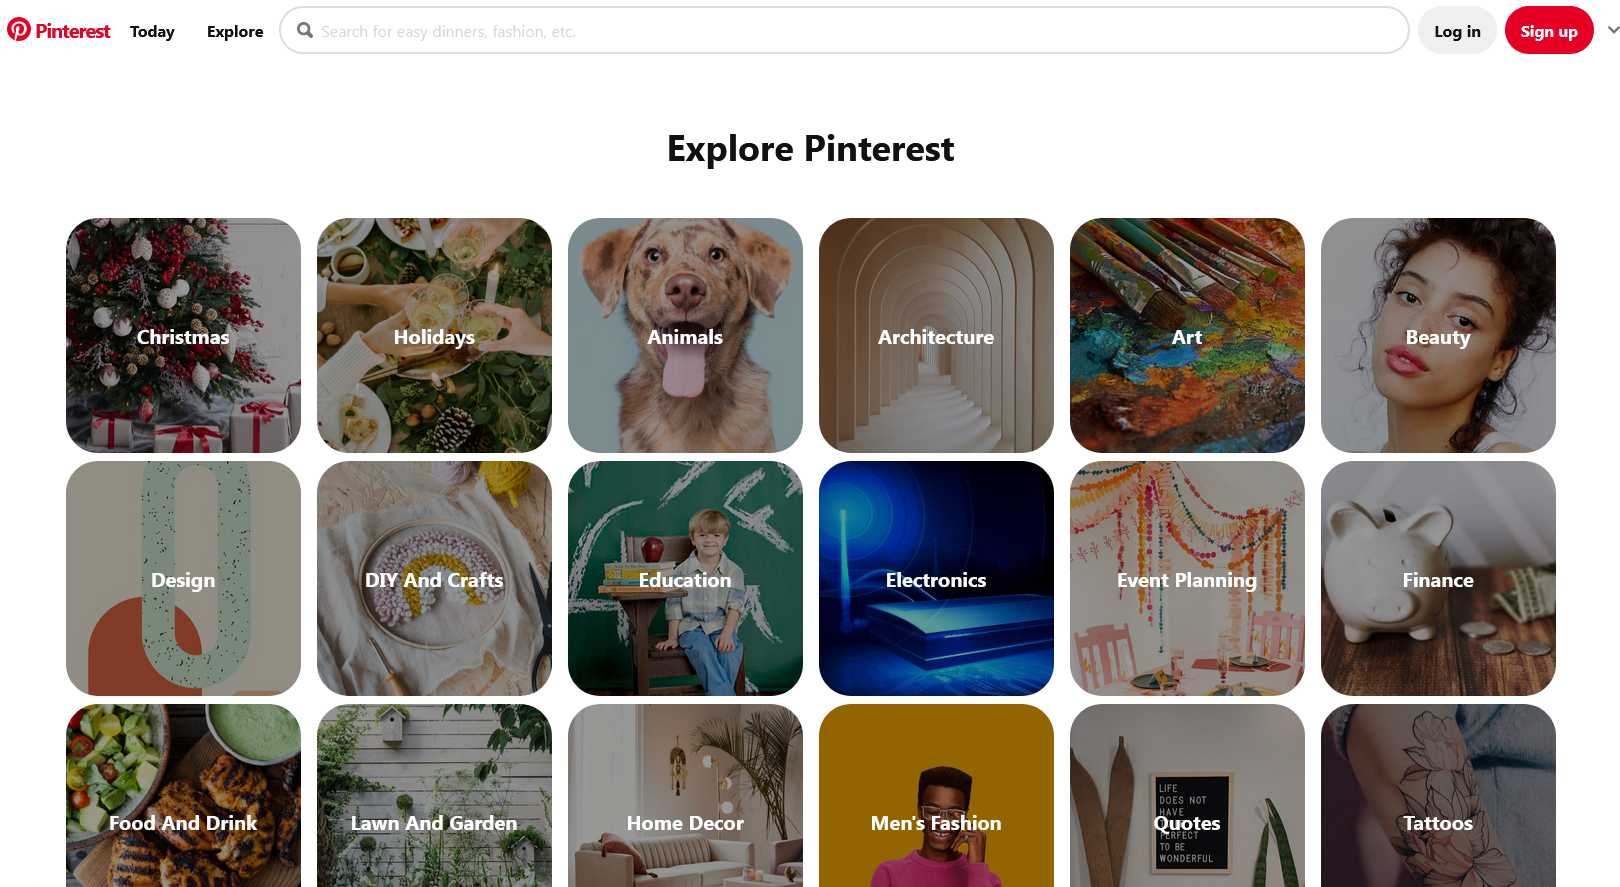 Pinterest with the Explore